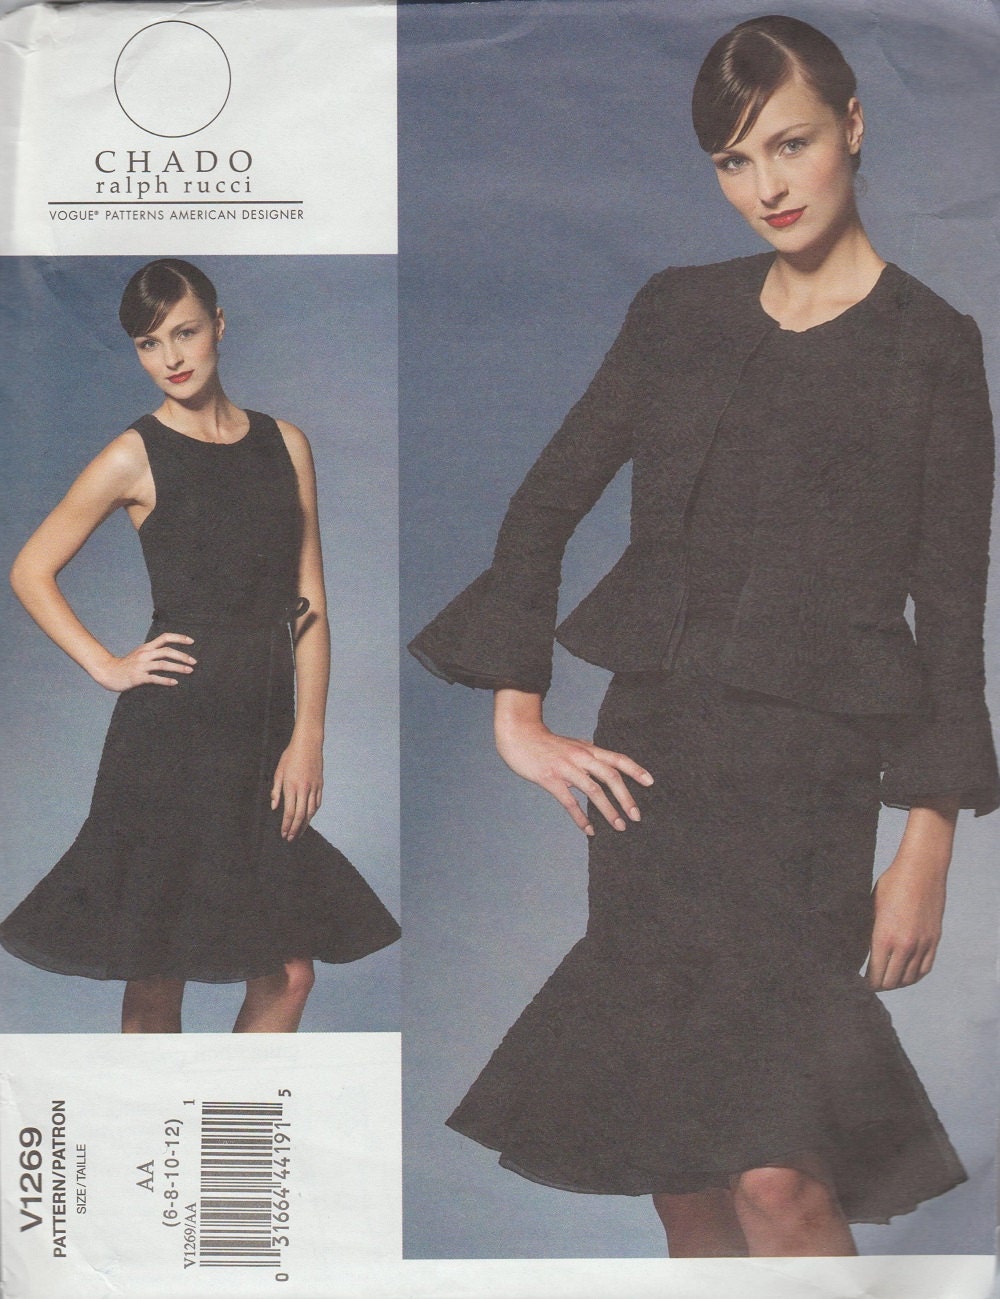 Vogue 1269 / Designer Sewing Pattern By Ralph Rucci / Chado / Dress And ...